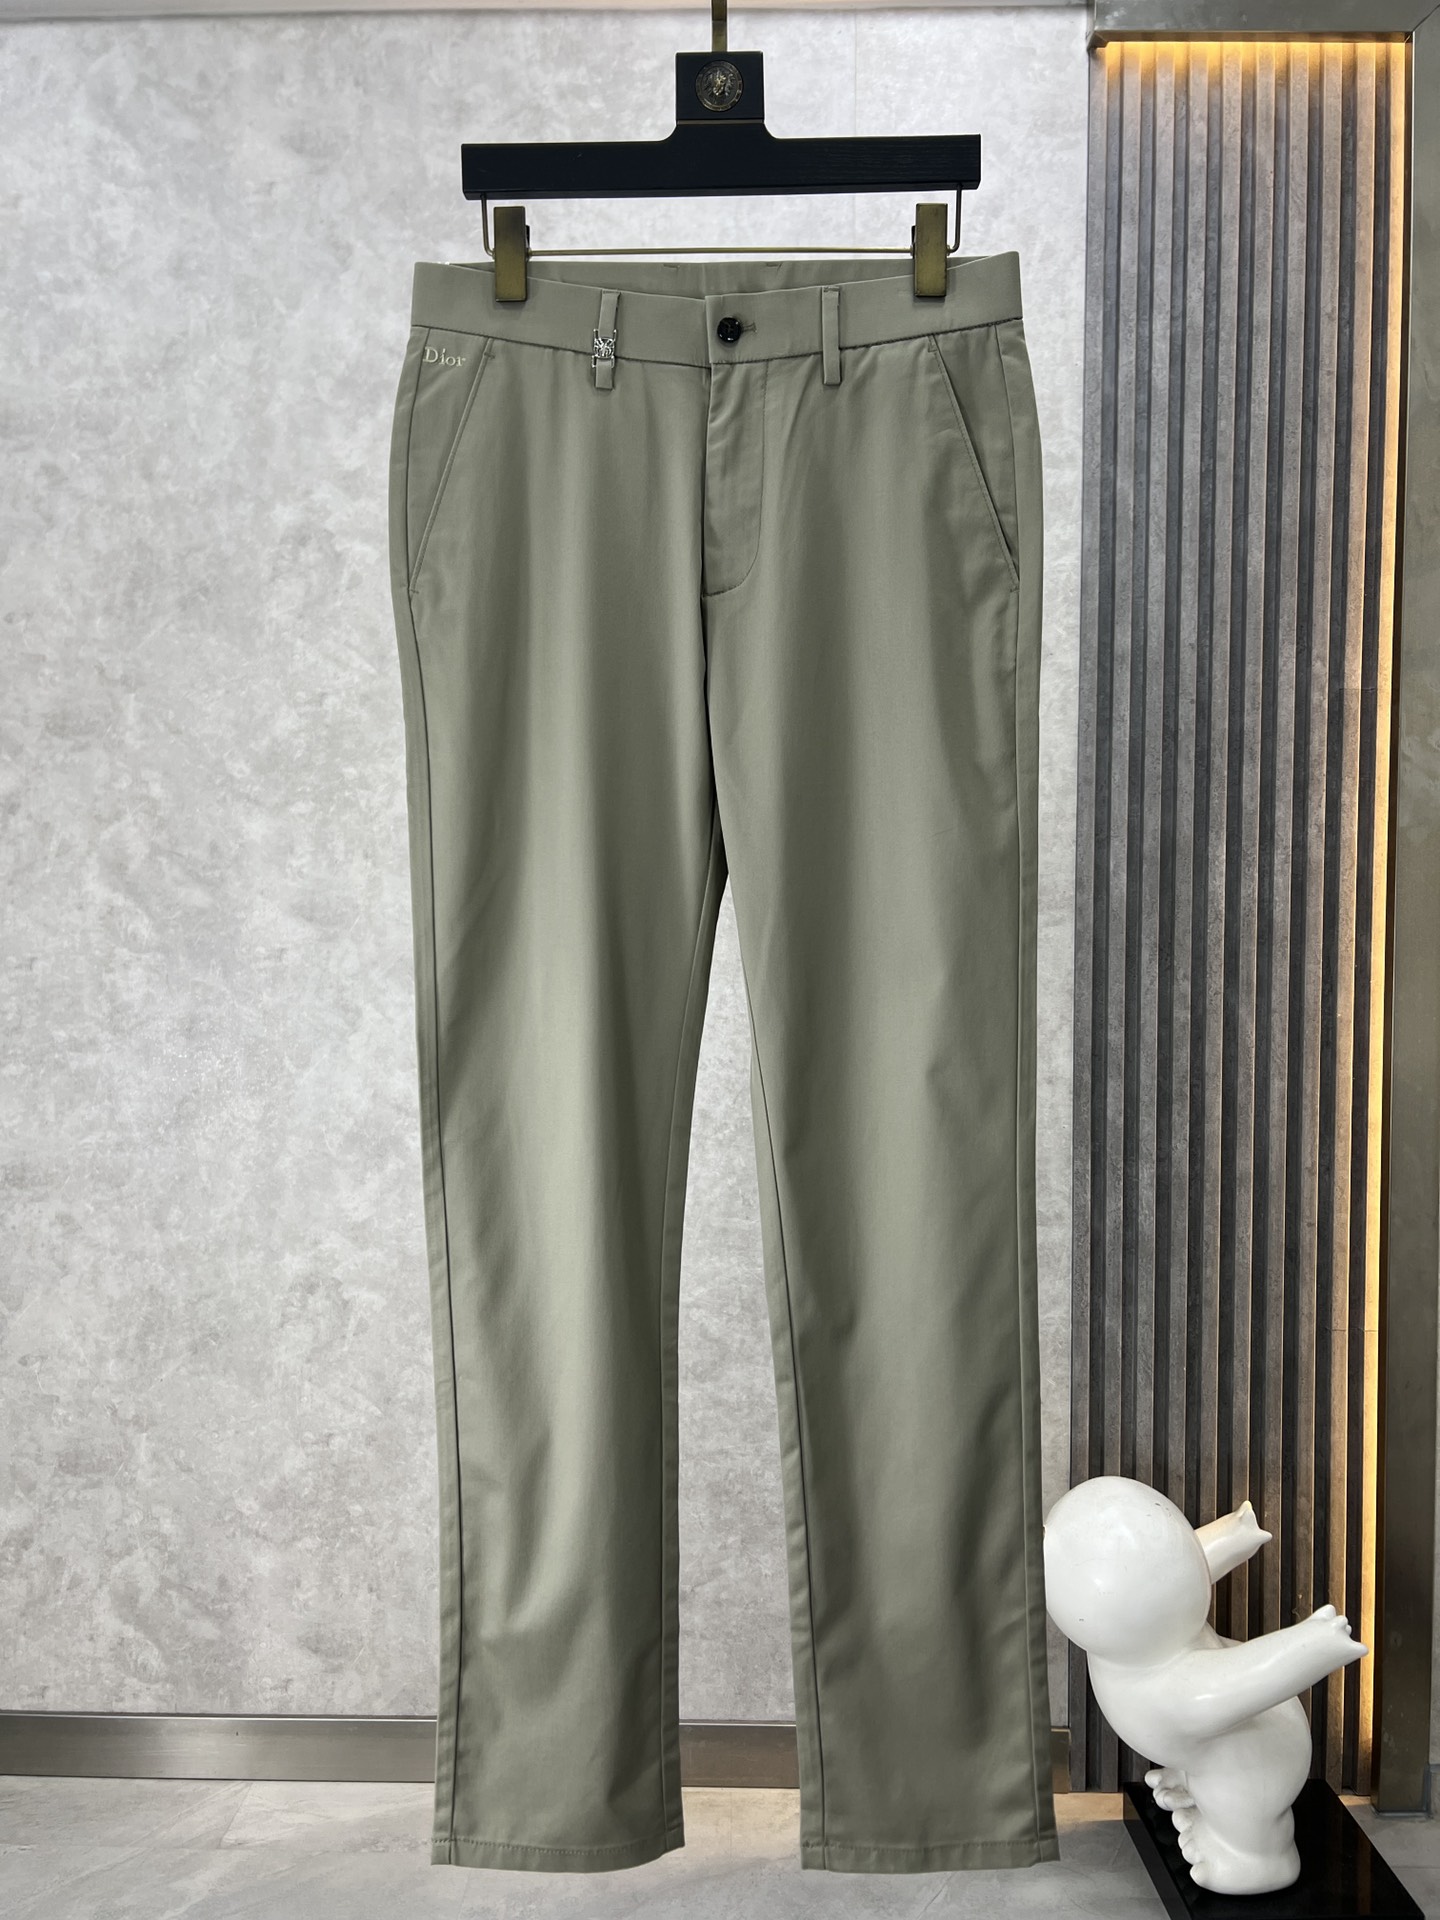 Dior Clothing Pants & Trousers Replica Shop
 Men Spring/Summer Collection Fashion Casual